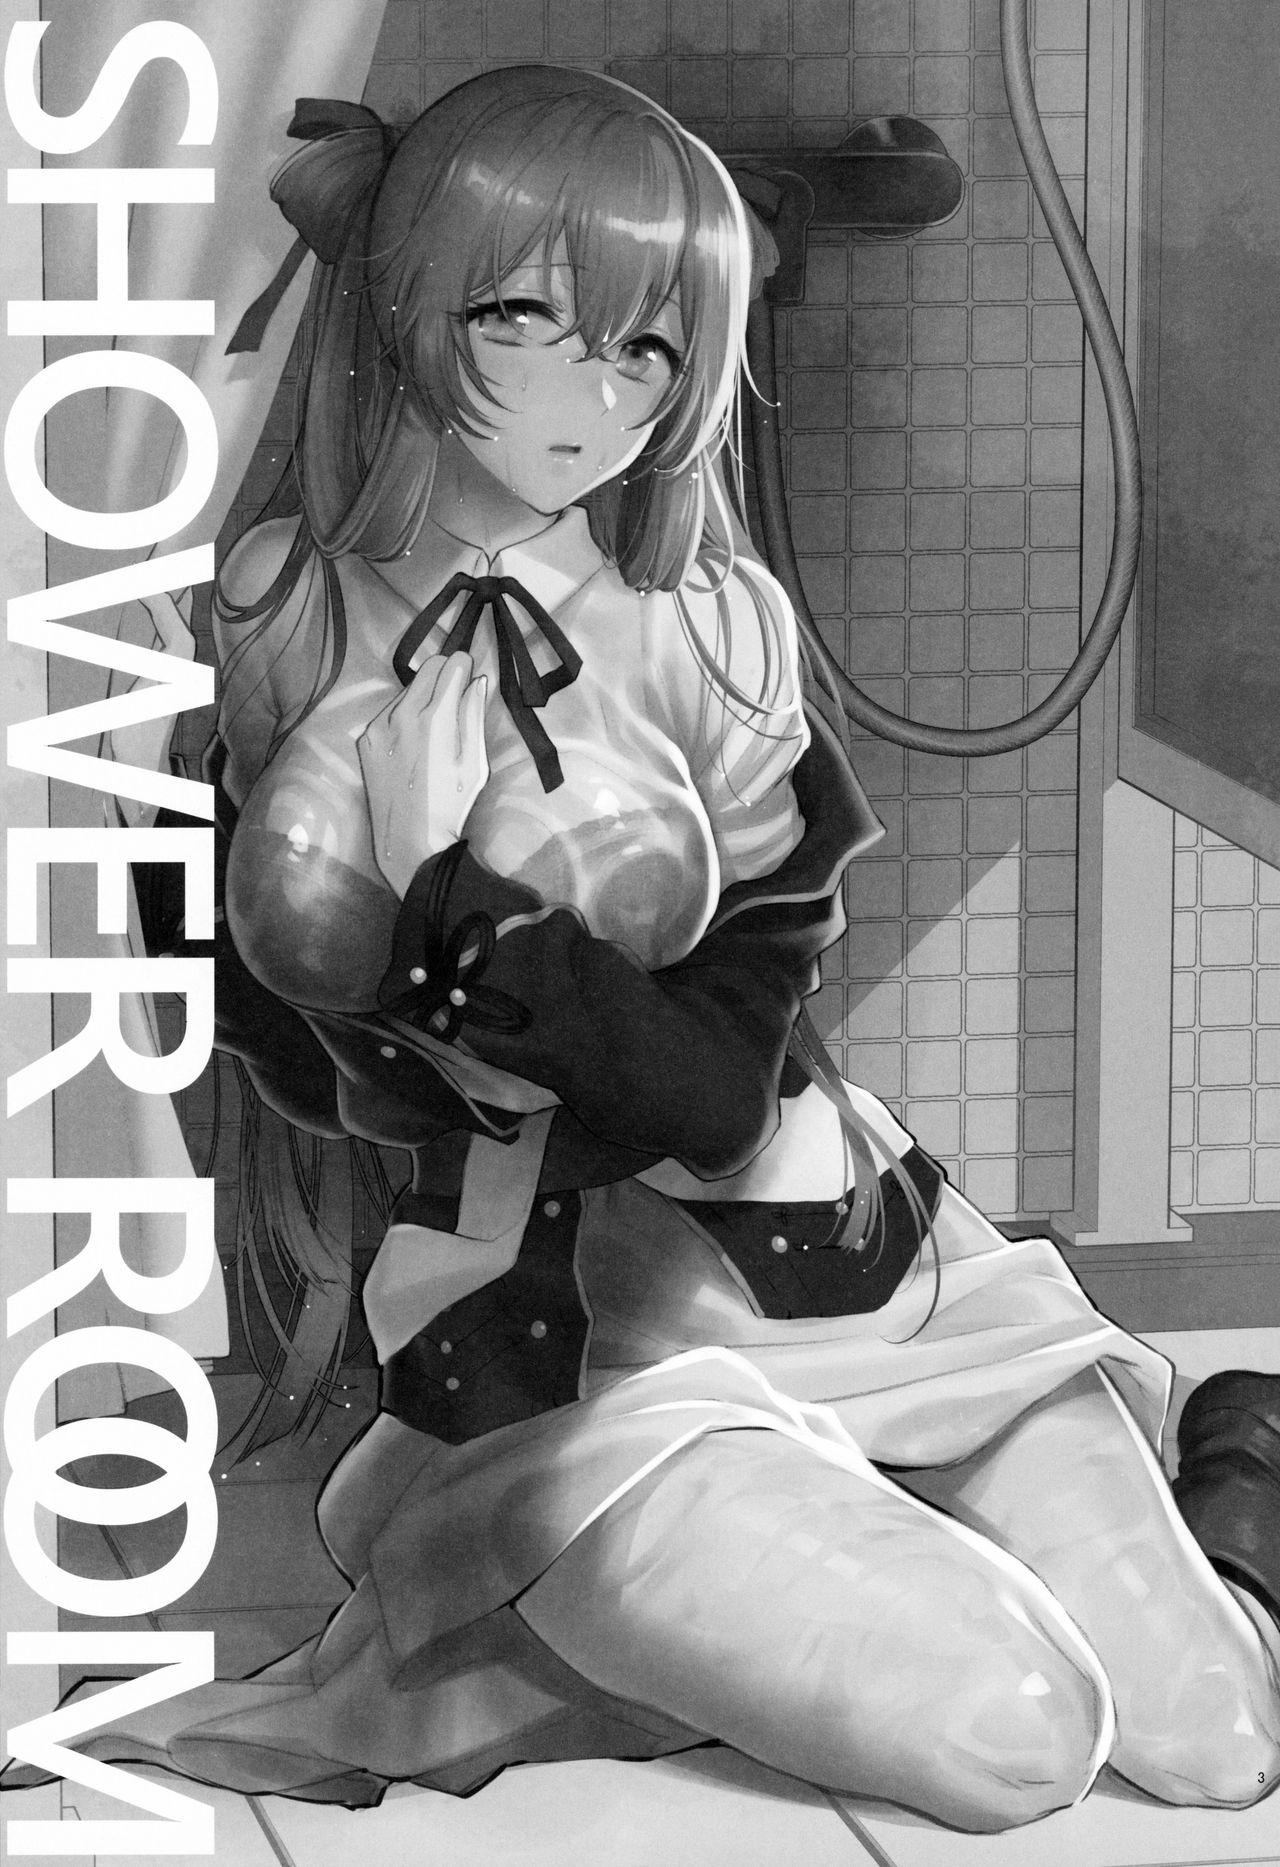 Porno 18 Shower Room - Girls frontline Muscular - Page 2